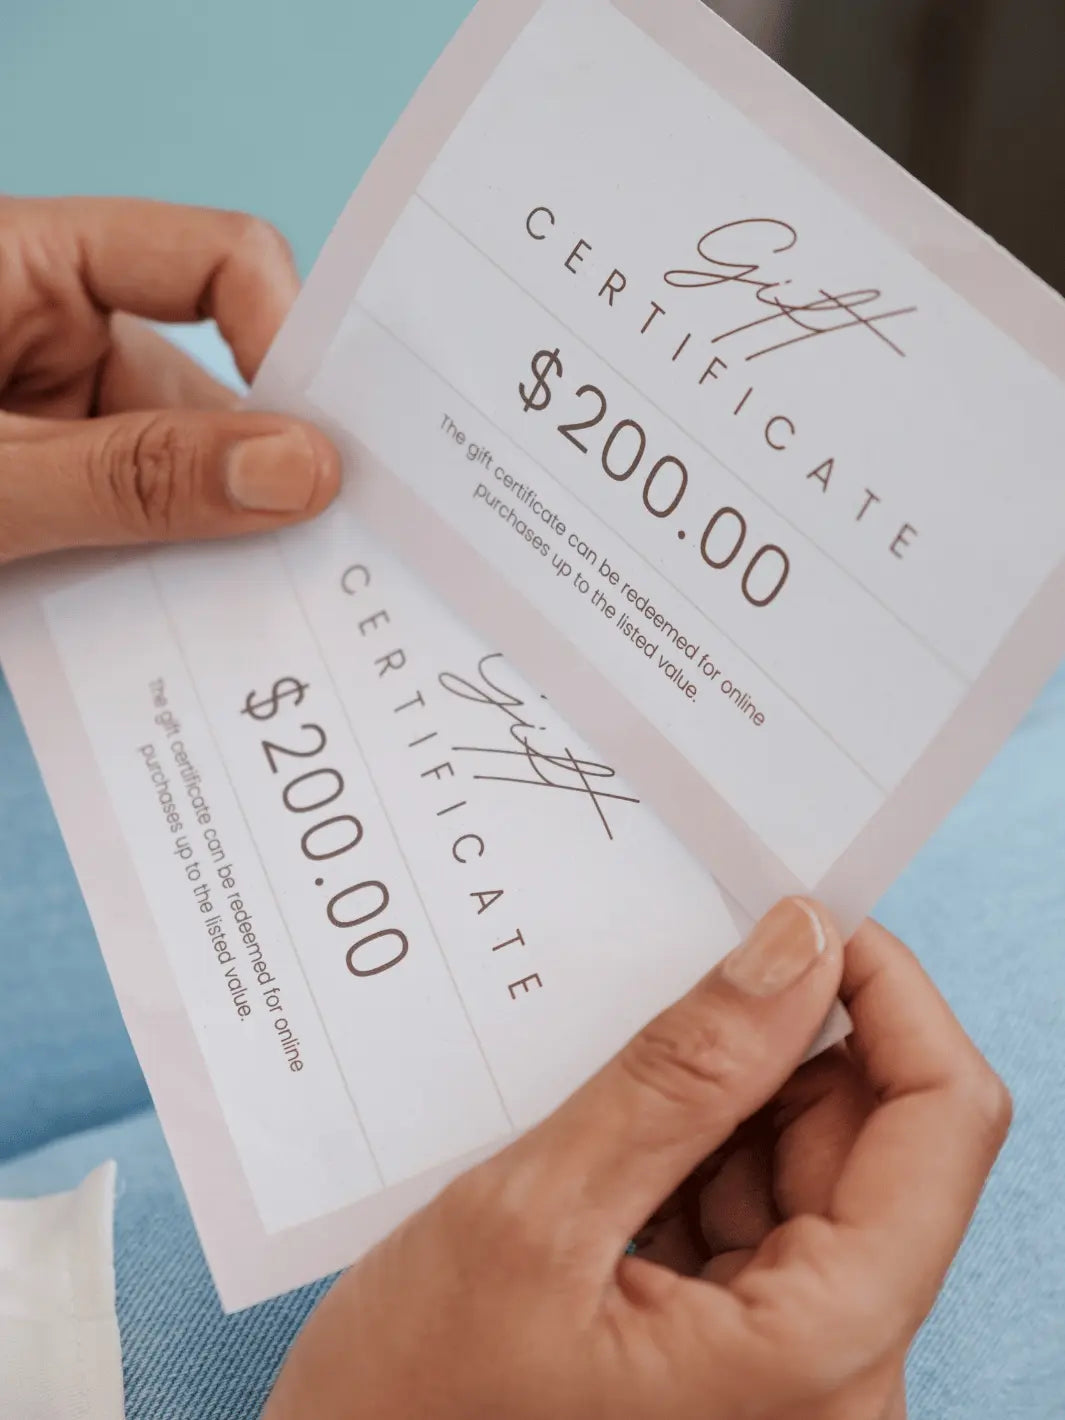 person holding a gift certificate with $200 value